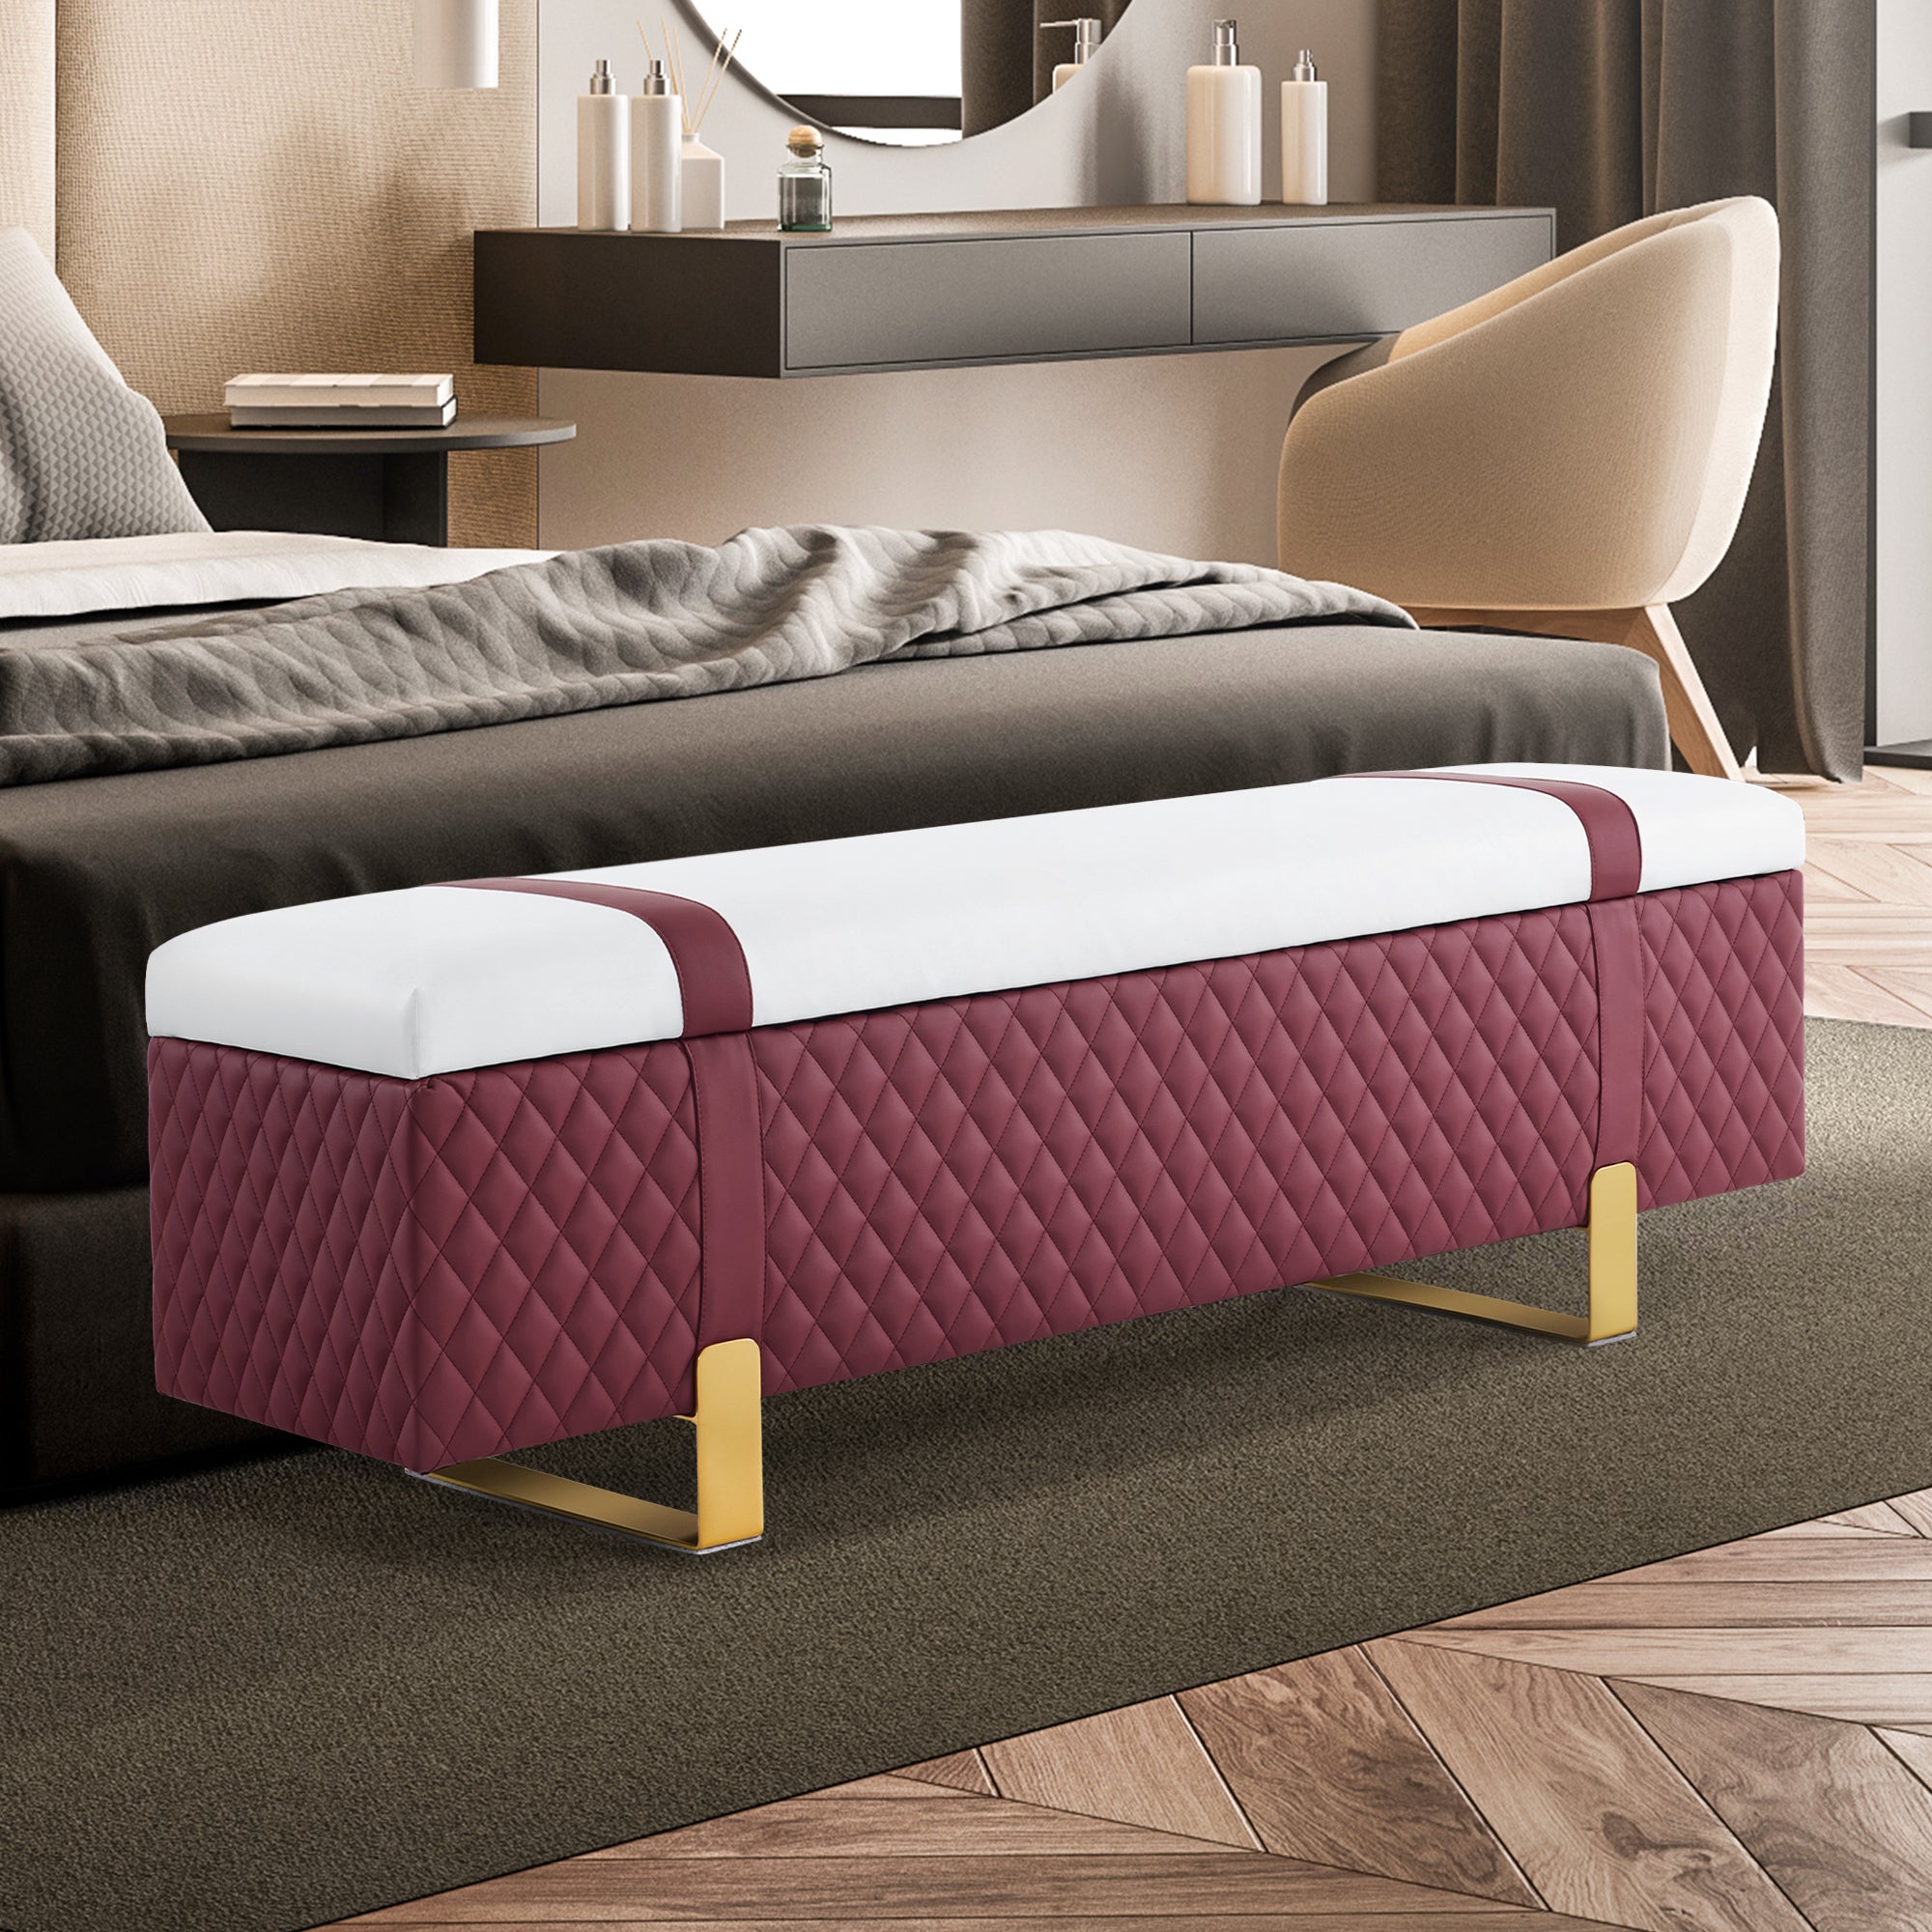 MCombo Modern Storage Ottoman Bench, Faux Leather Upholstered Footstool with Storage Space, Bed End Bench for Bedroom, Living Room, Entryway W463